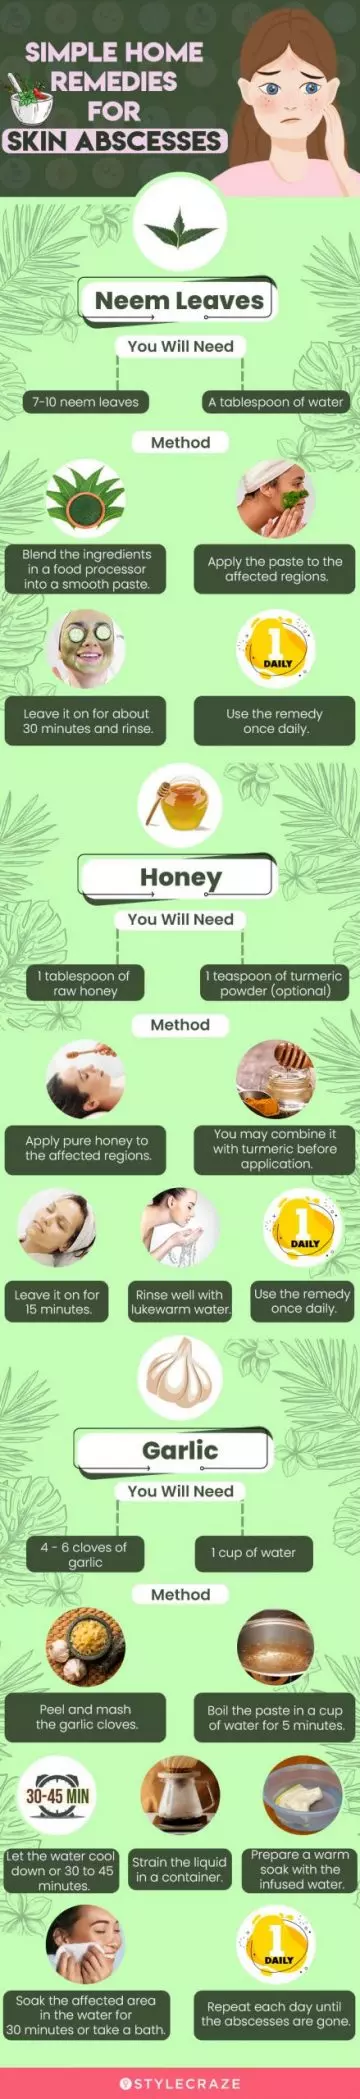 simple home remedies for skin abscesses (infographic)